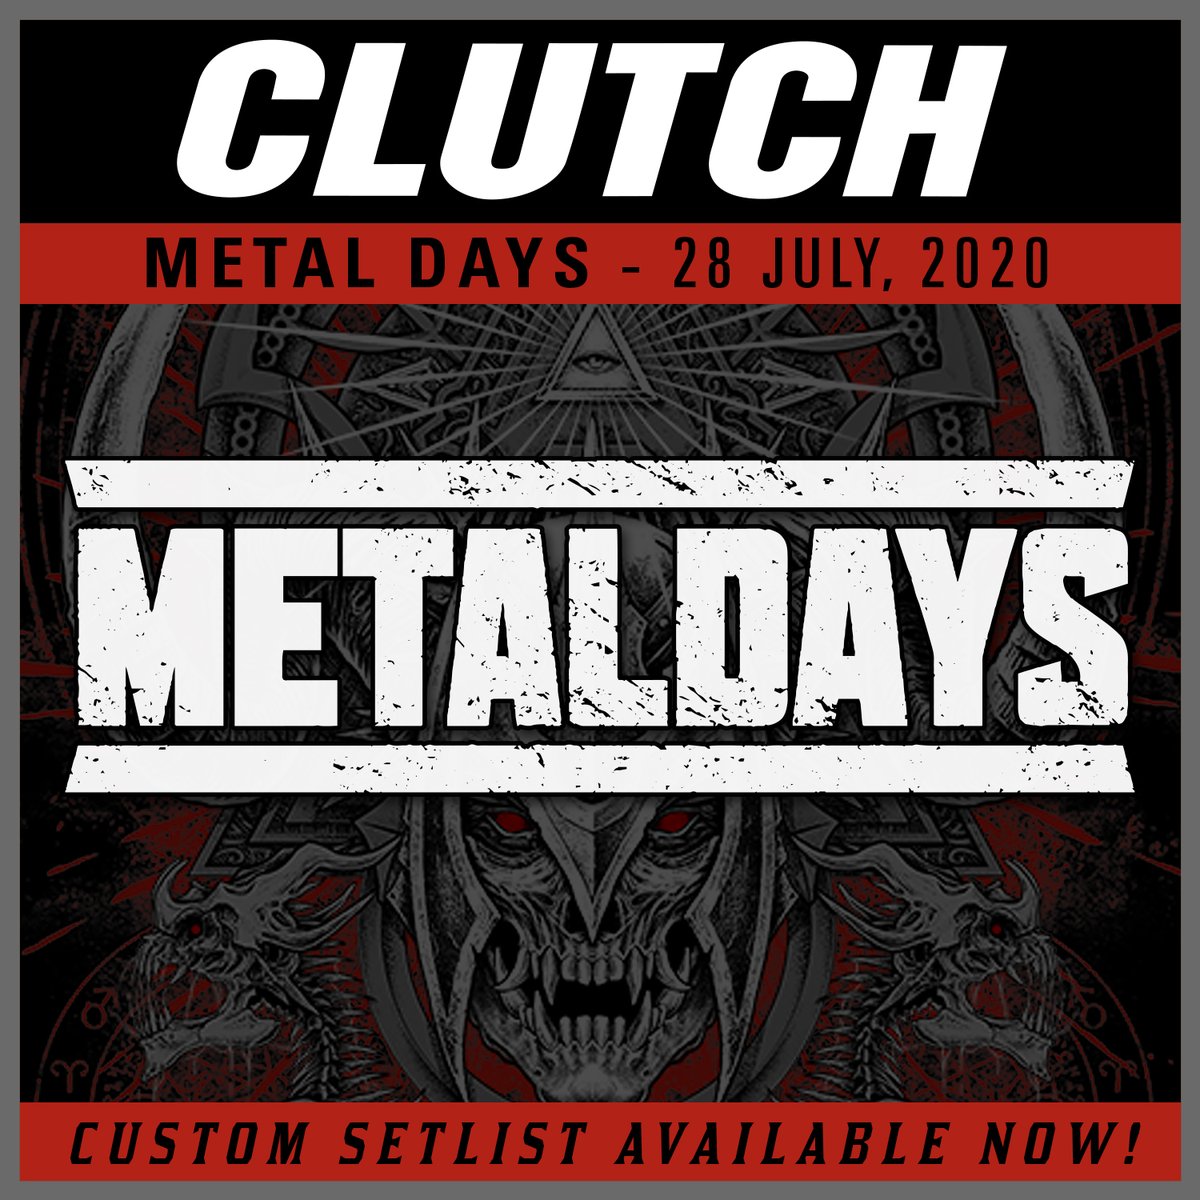 CLUTCH’S 2020 FESTIVAL SUMMER CONTINUES ONLINE! July 28th, 2020 – Playlist for “Metal Days” in Tolmin, Slovenia at spoti.fi/3fVG6Sp. Rescheduled at the same location in 2021 and Clutch is looking forward to performing for their fans a year from now on July 27th, 2021.